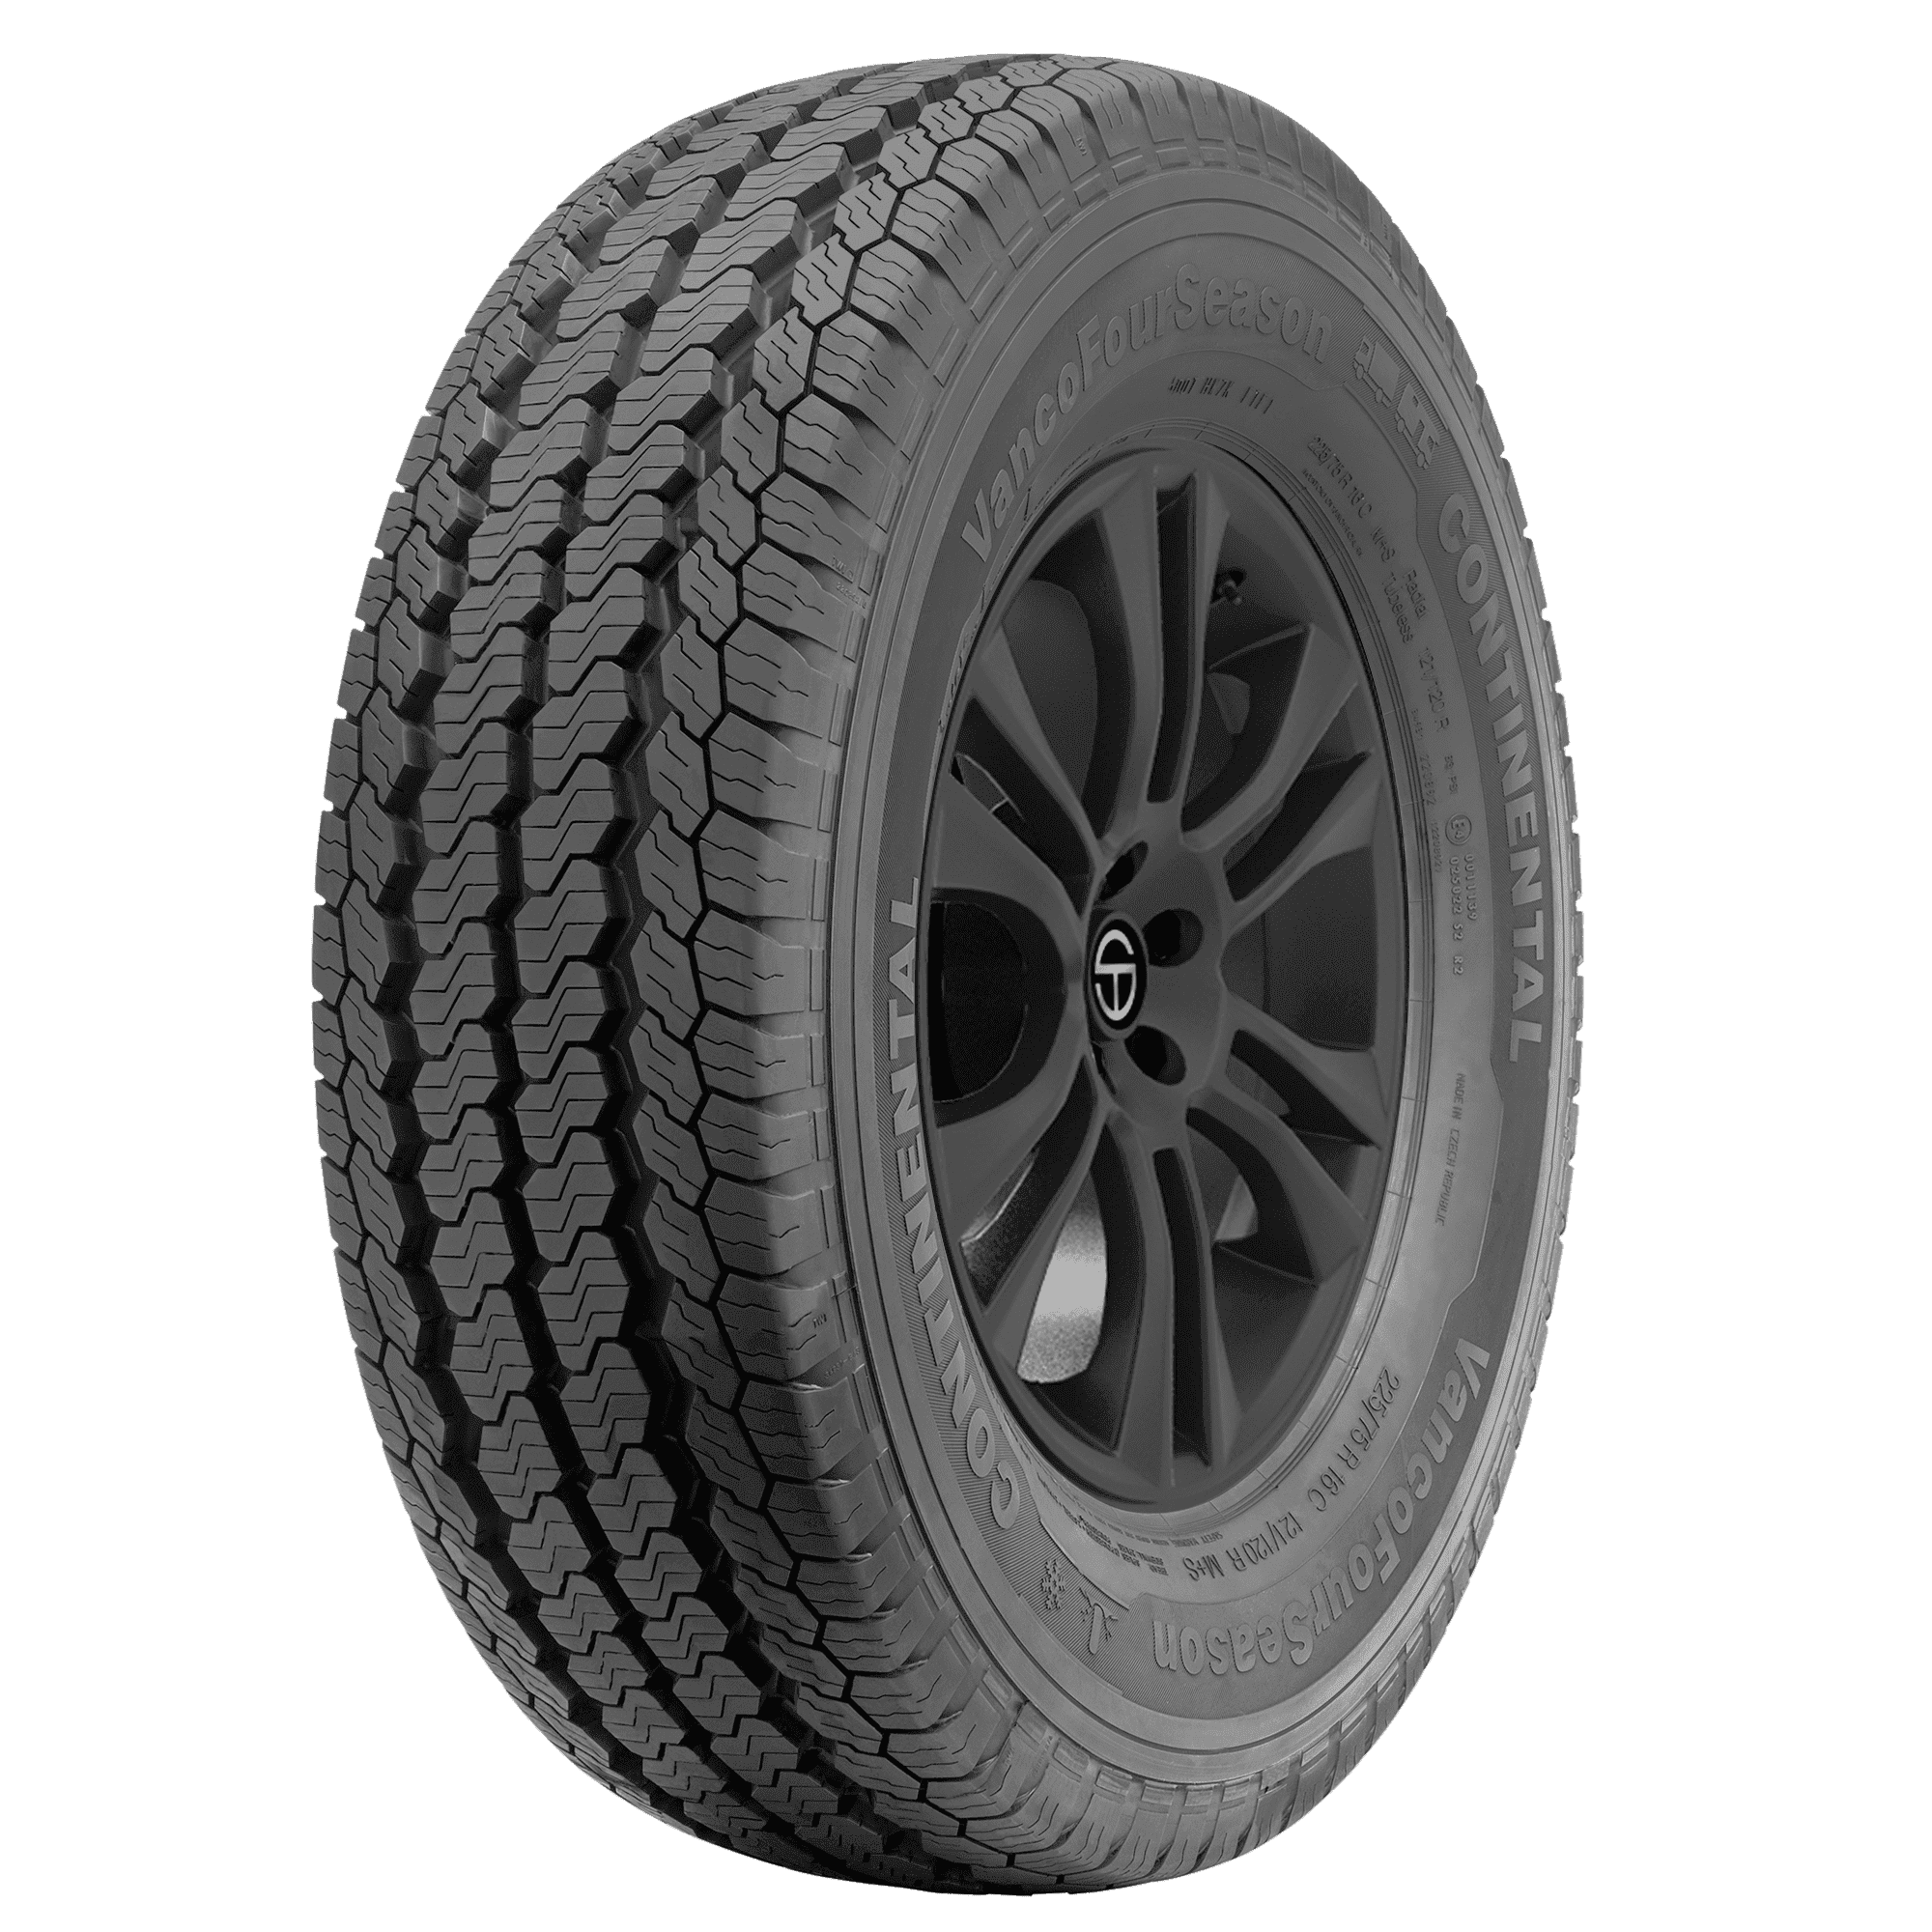 Shop for 205/75R16 Tires for Your Vehicle | SimpleTire